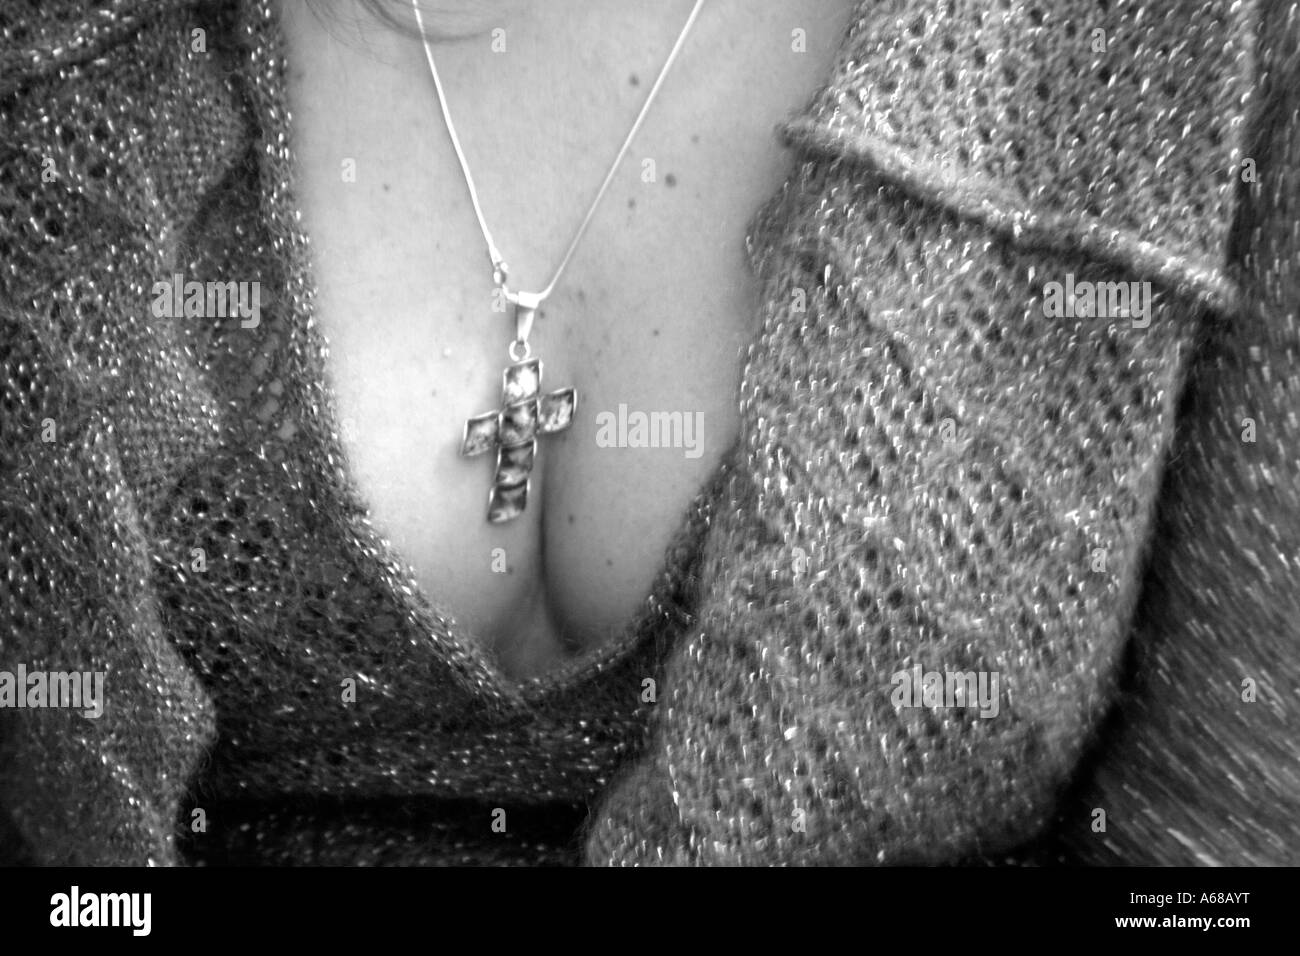 Silver Necklace Cross Hanging Womans Cleavage Stock Photo 9112111